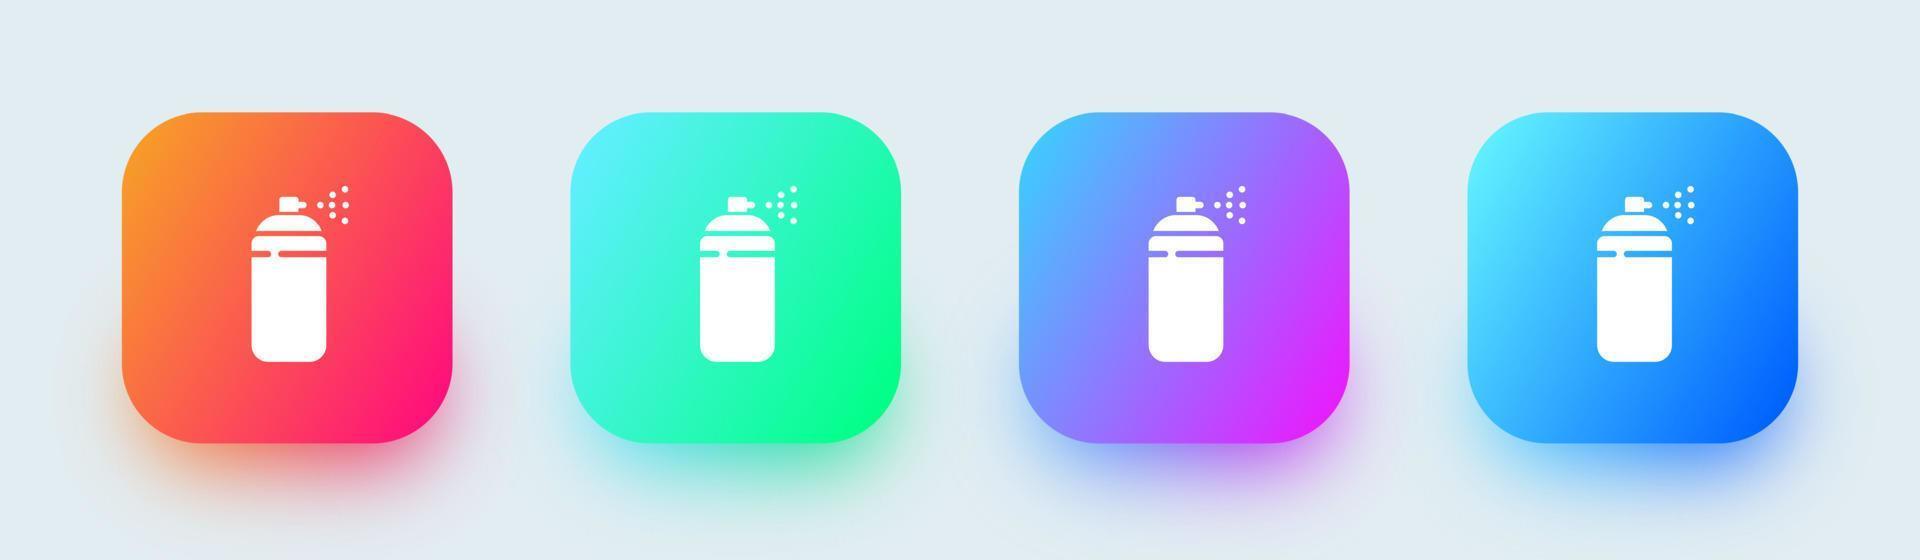 Airbrush solid icon in square gradient colors. Spray signs vector illustration.